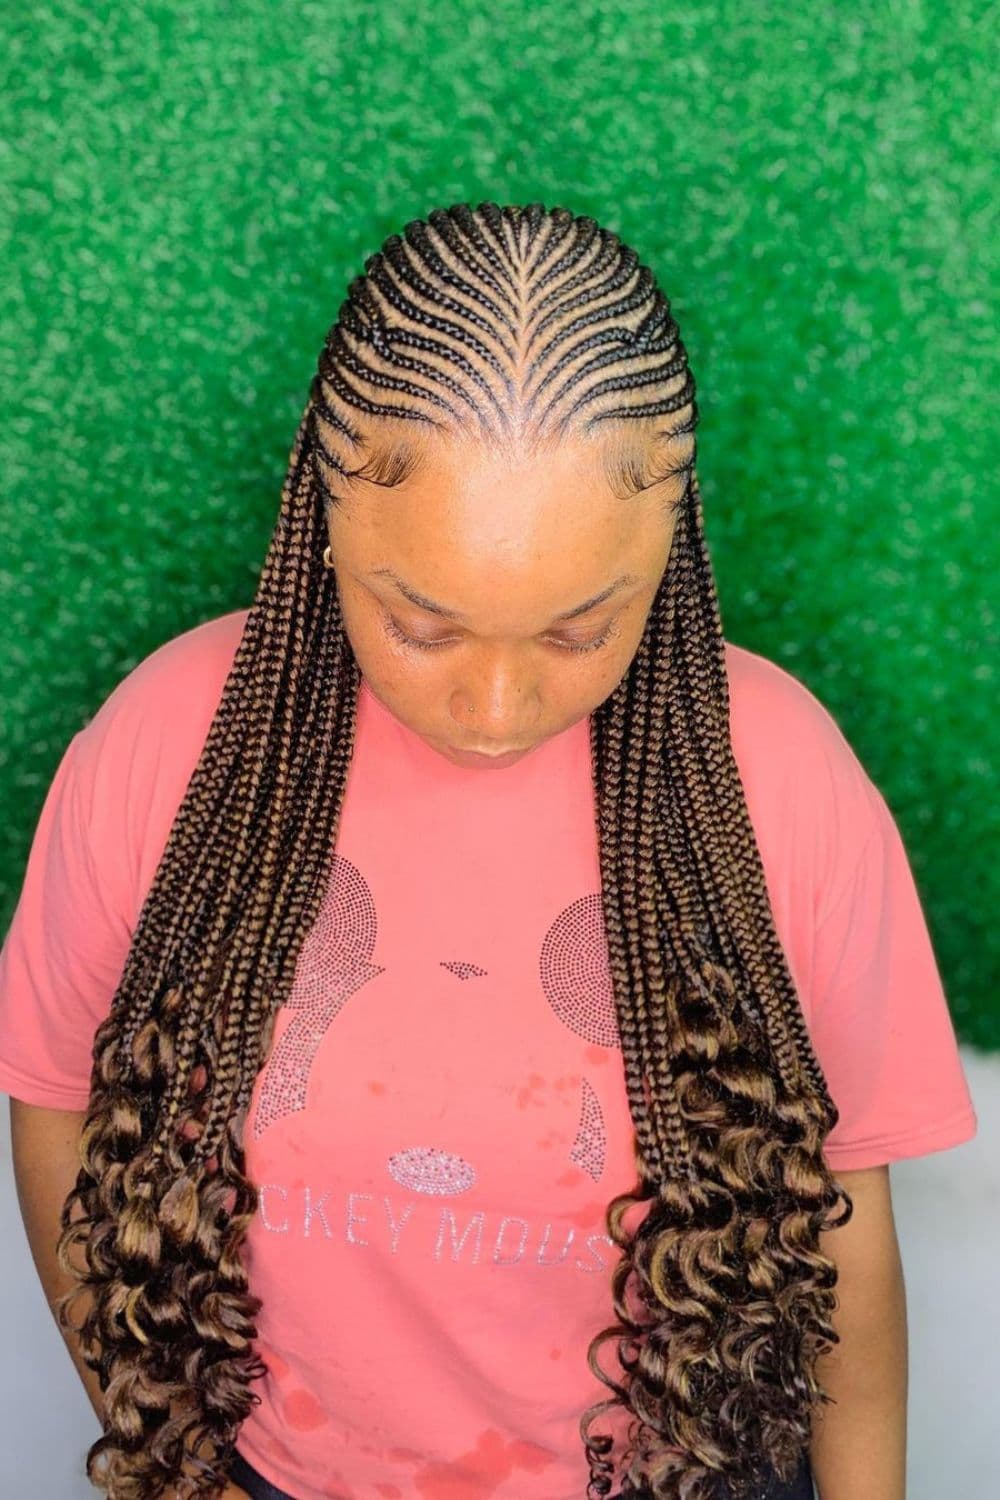 A woman in a pink t-shirt with brown middle-parted tribal braids.